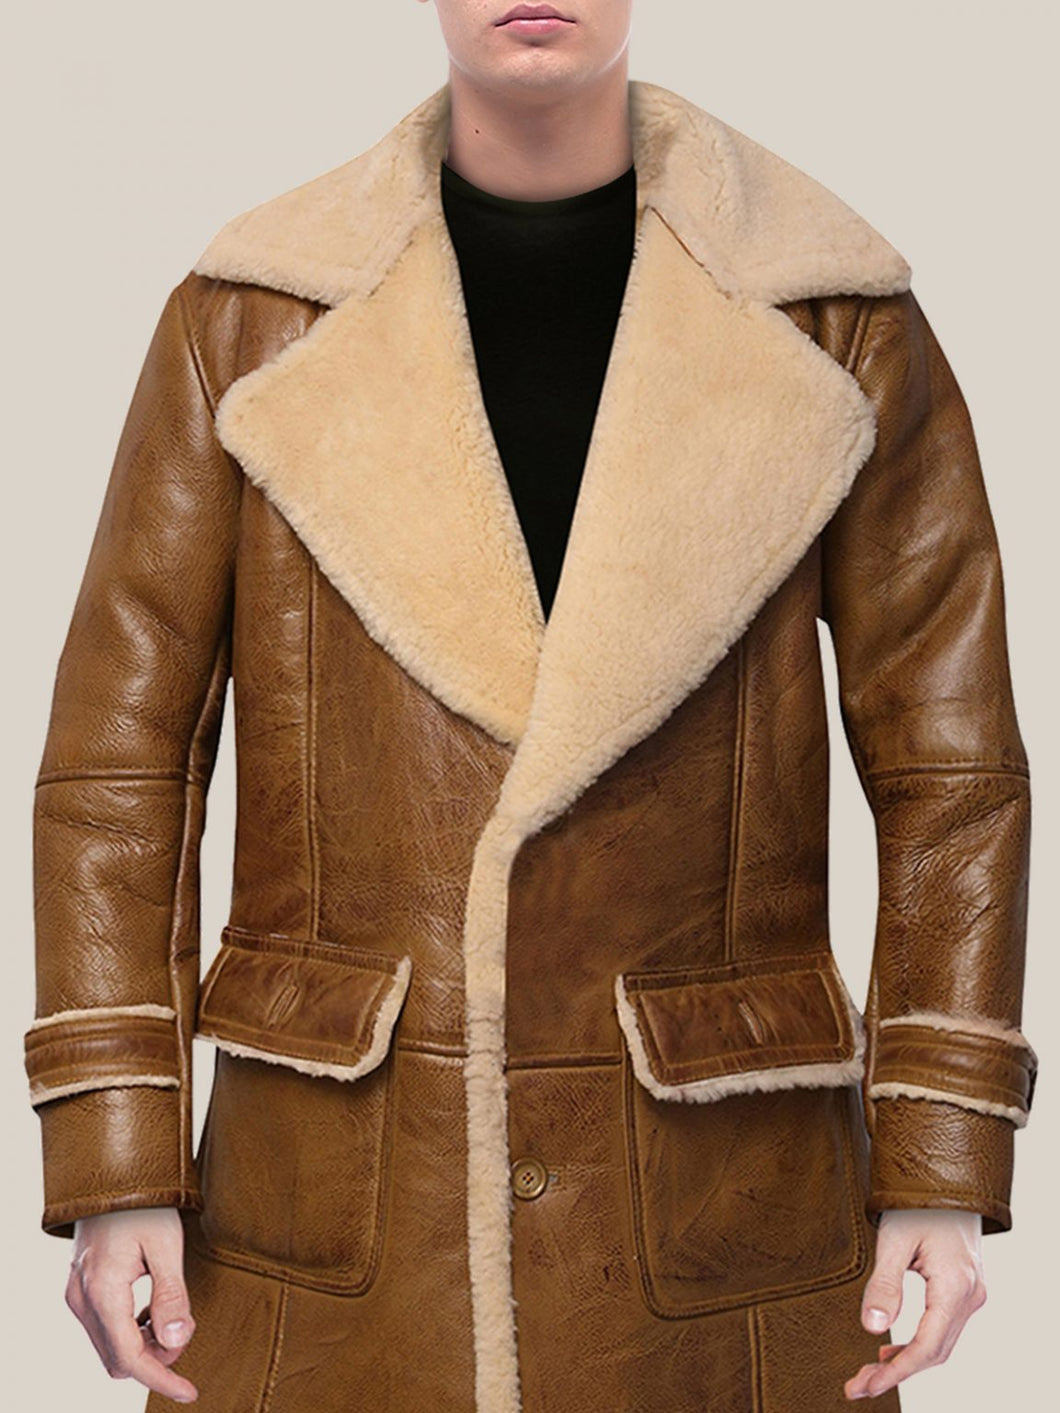 Men’s Striking Choco-Brown Shearling Leather Trench Coat